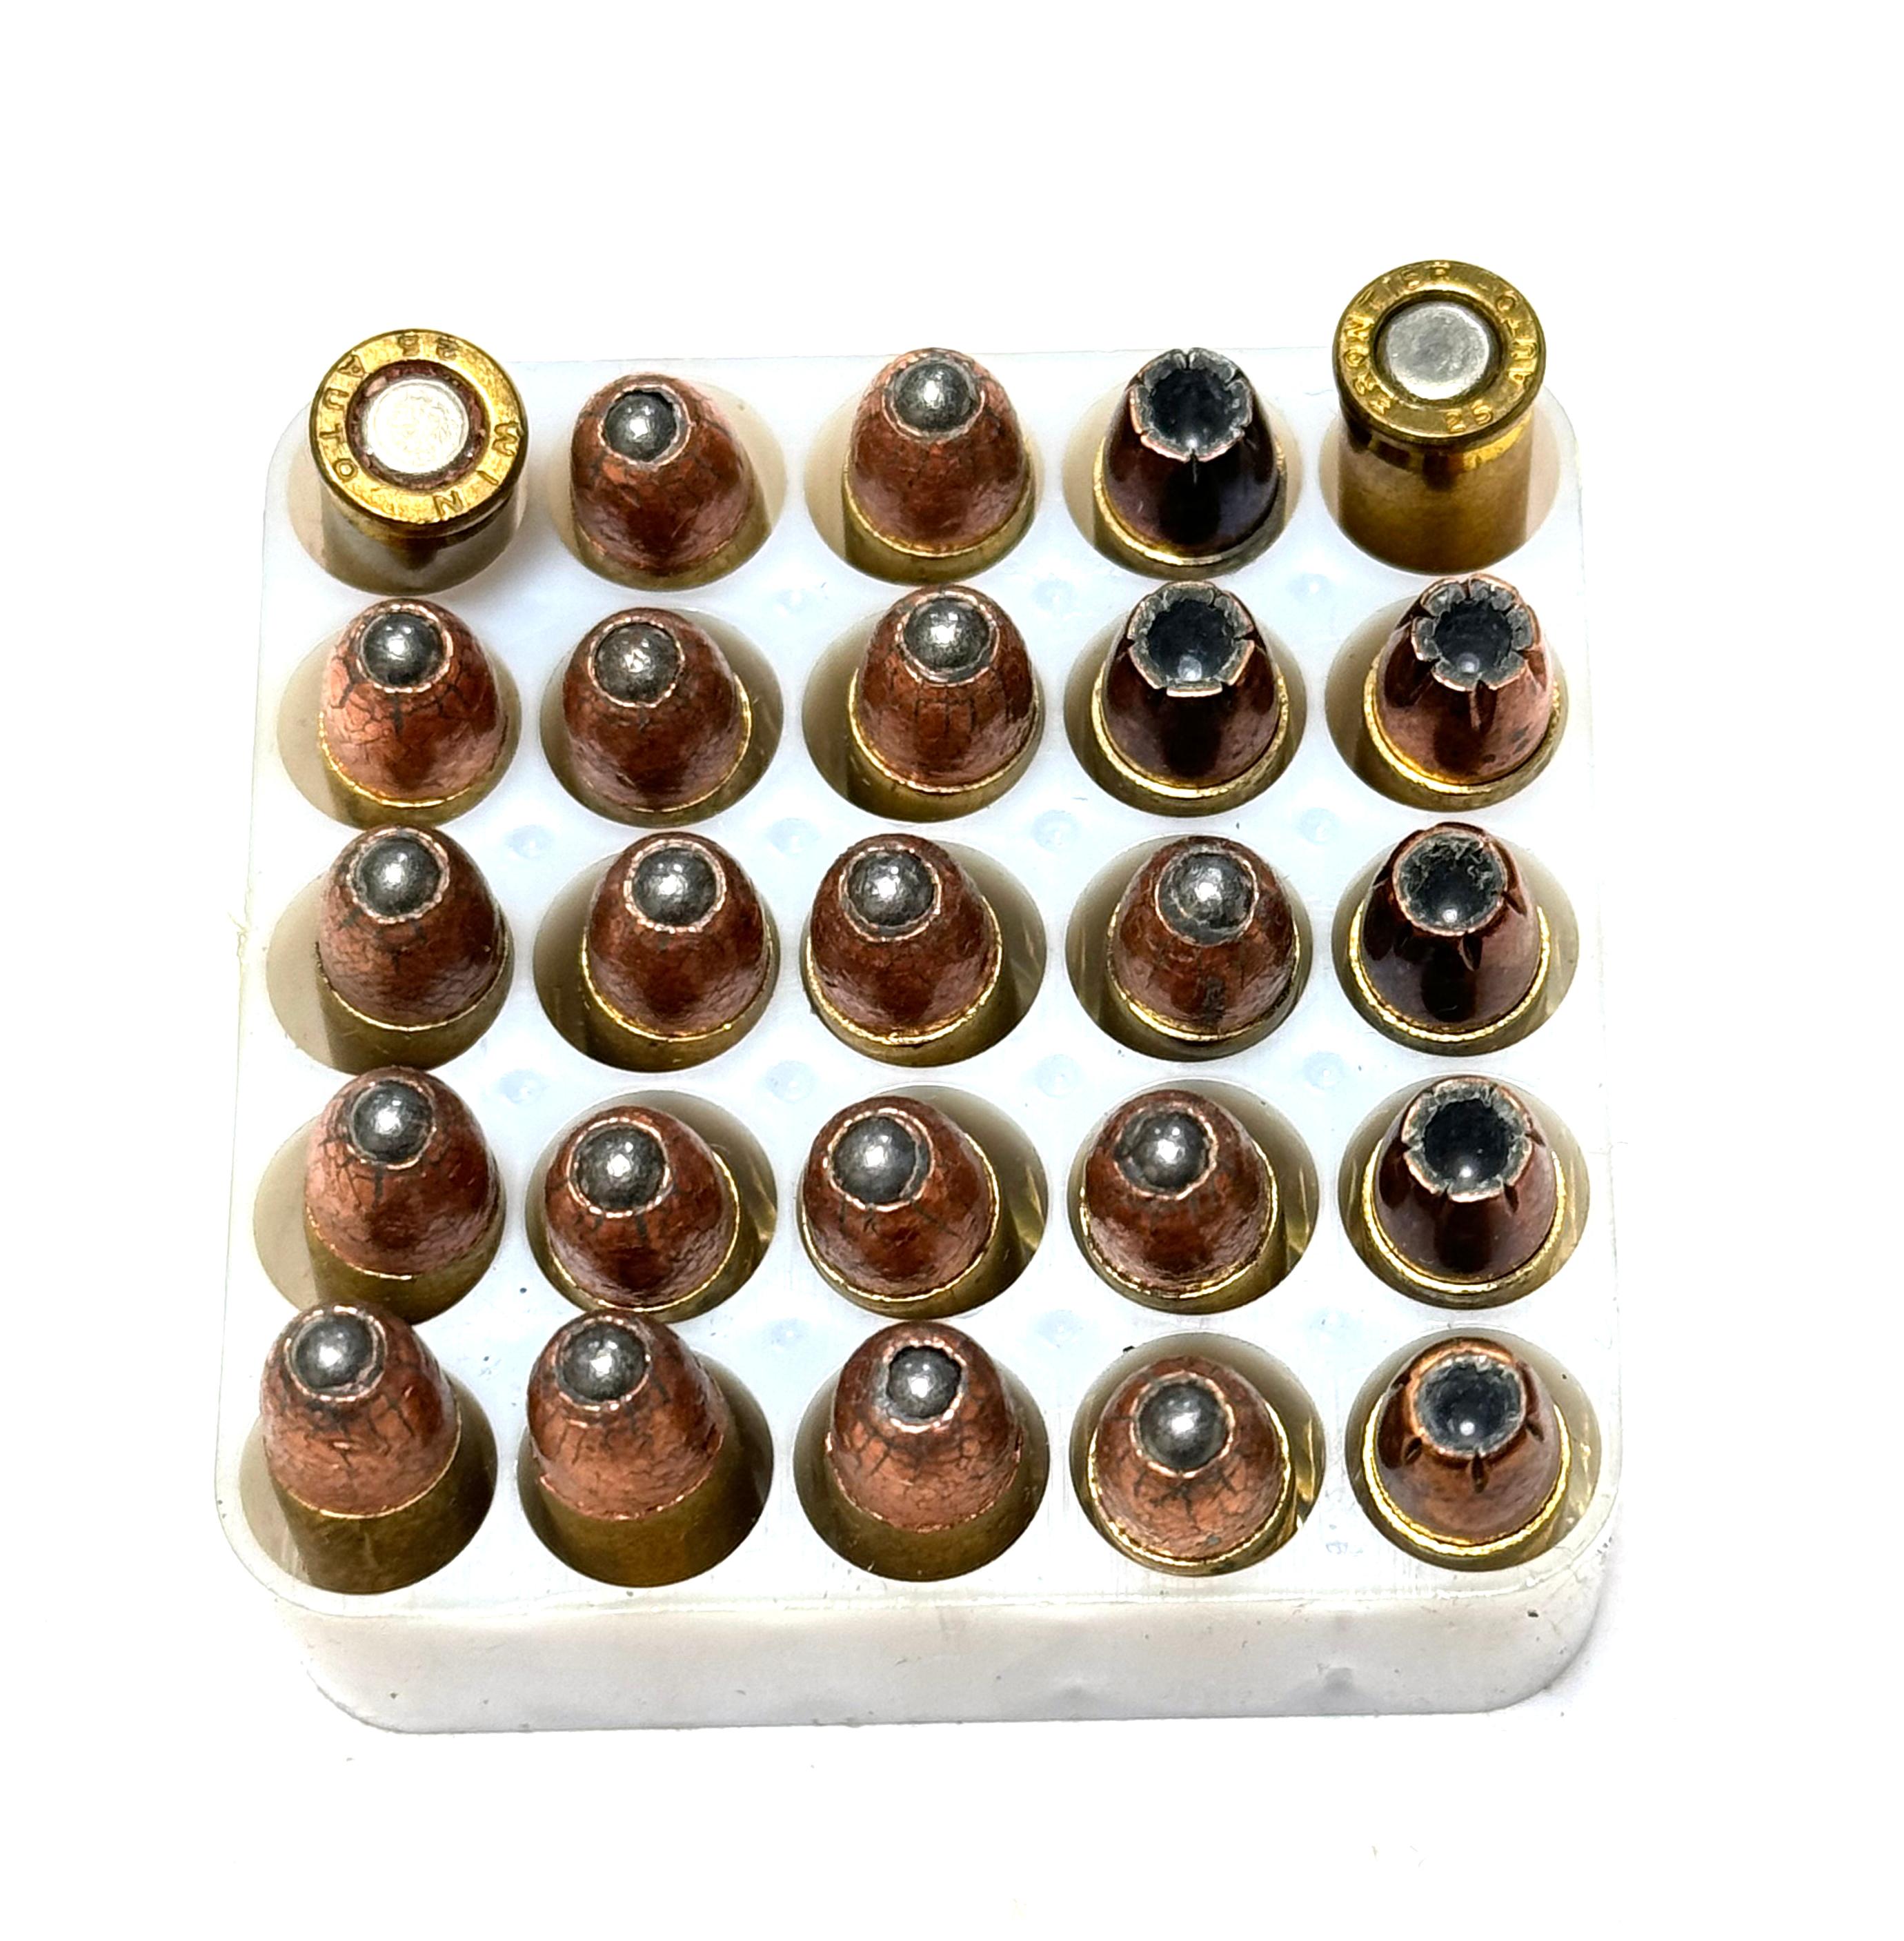 Factory New 6rds. of .32 AUTO & 25rds. of .25 AUTO Personal Defense Ammunition